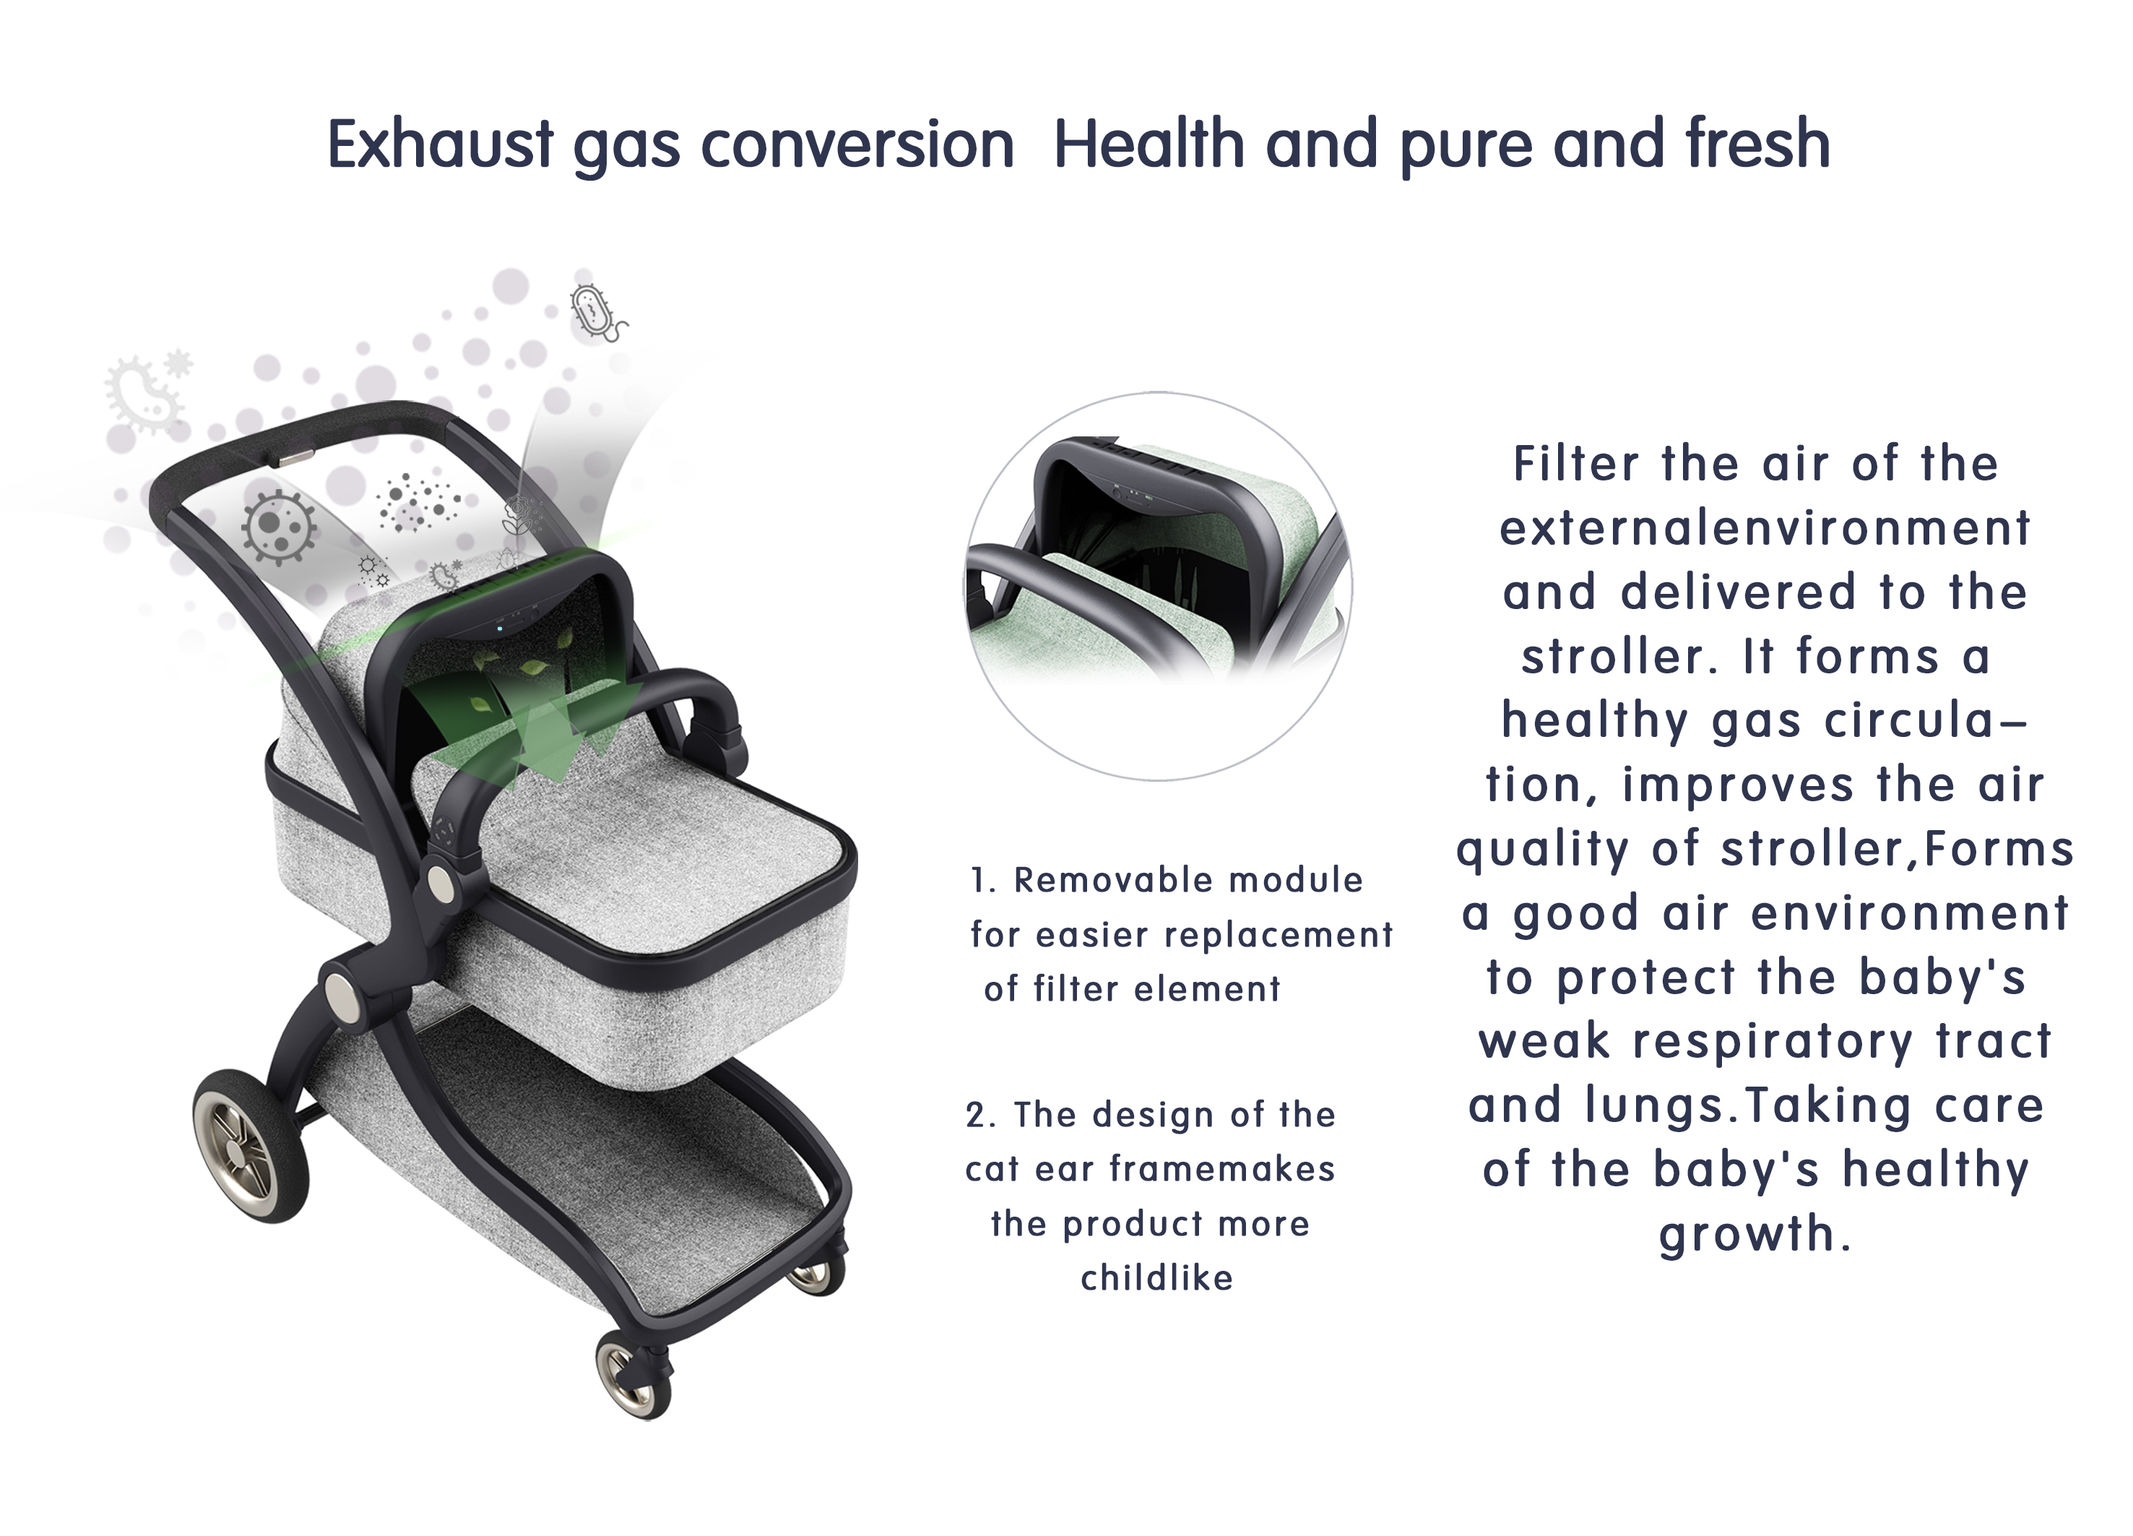 Baby stroller of filtering air and preventing nois